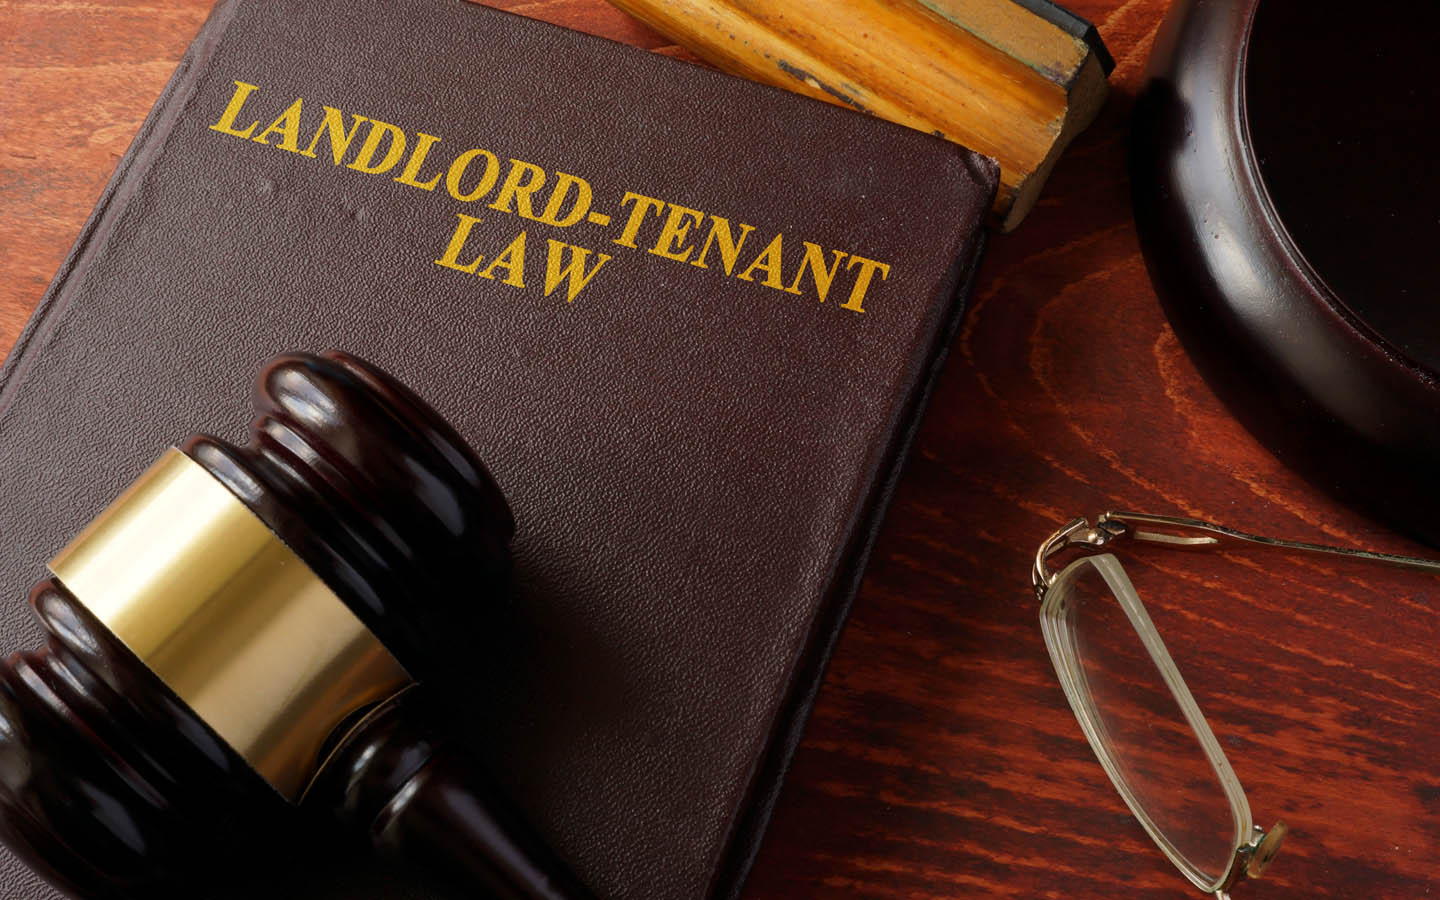 Rental Good Conduct Certificate is used for inquiry about a potential tenant or landlord